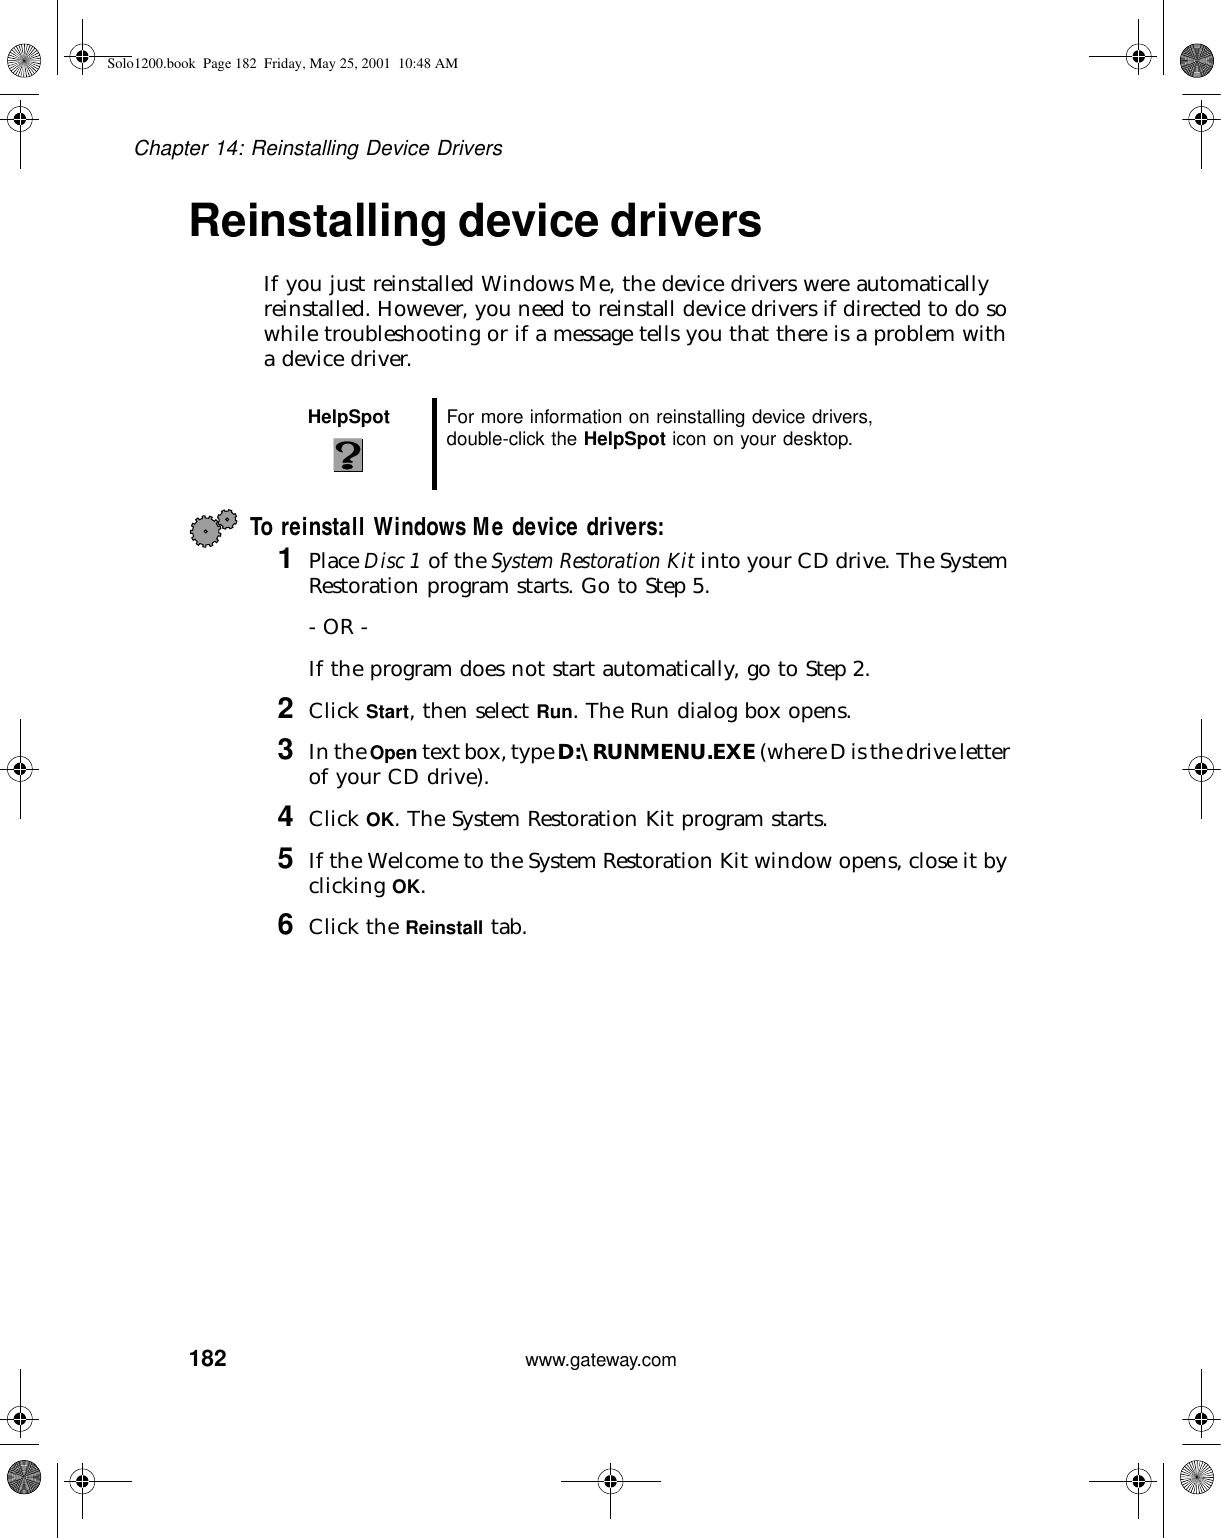 182Chapter 14: Reinstalling Device Driverswww.gateway.comReinstalling device driversIf you just reinstalled Windows Me, the device drivers were automatically reinstalled. However, you need to reinstall device drivers if directed to do so while troubleshooting or if a message tells you that there is a problem with a device driver.To reinstall Windows Me device drivers:1Place Disc 1 of the System Restoration Kit into your CD drive. The System Restoration program starts. Go to Step 5.- OR -If the program does not start automatically, go to Step 2.2Click Start, then select Run. The Run dialog box opens.3In the Open text box, type D:\RUNMENU.EXE (where D is the drive letter of your CD drive).4Click OK. The System Restoration Kit program starts.5If the Welcome to the System Restoration Kit window opens, close it by clicking OK.6Click the Reinstall tab.HelpSpot For more information on reinstalling device drivers, double-click the HelpSpot icon on your desktop.Solo1200.book Page 182 Friday, May 25, 2001 10:48 AM